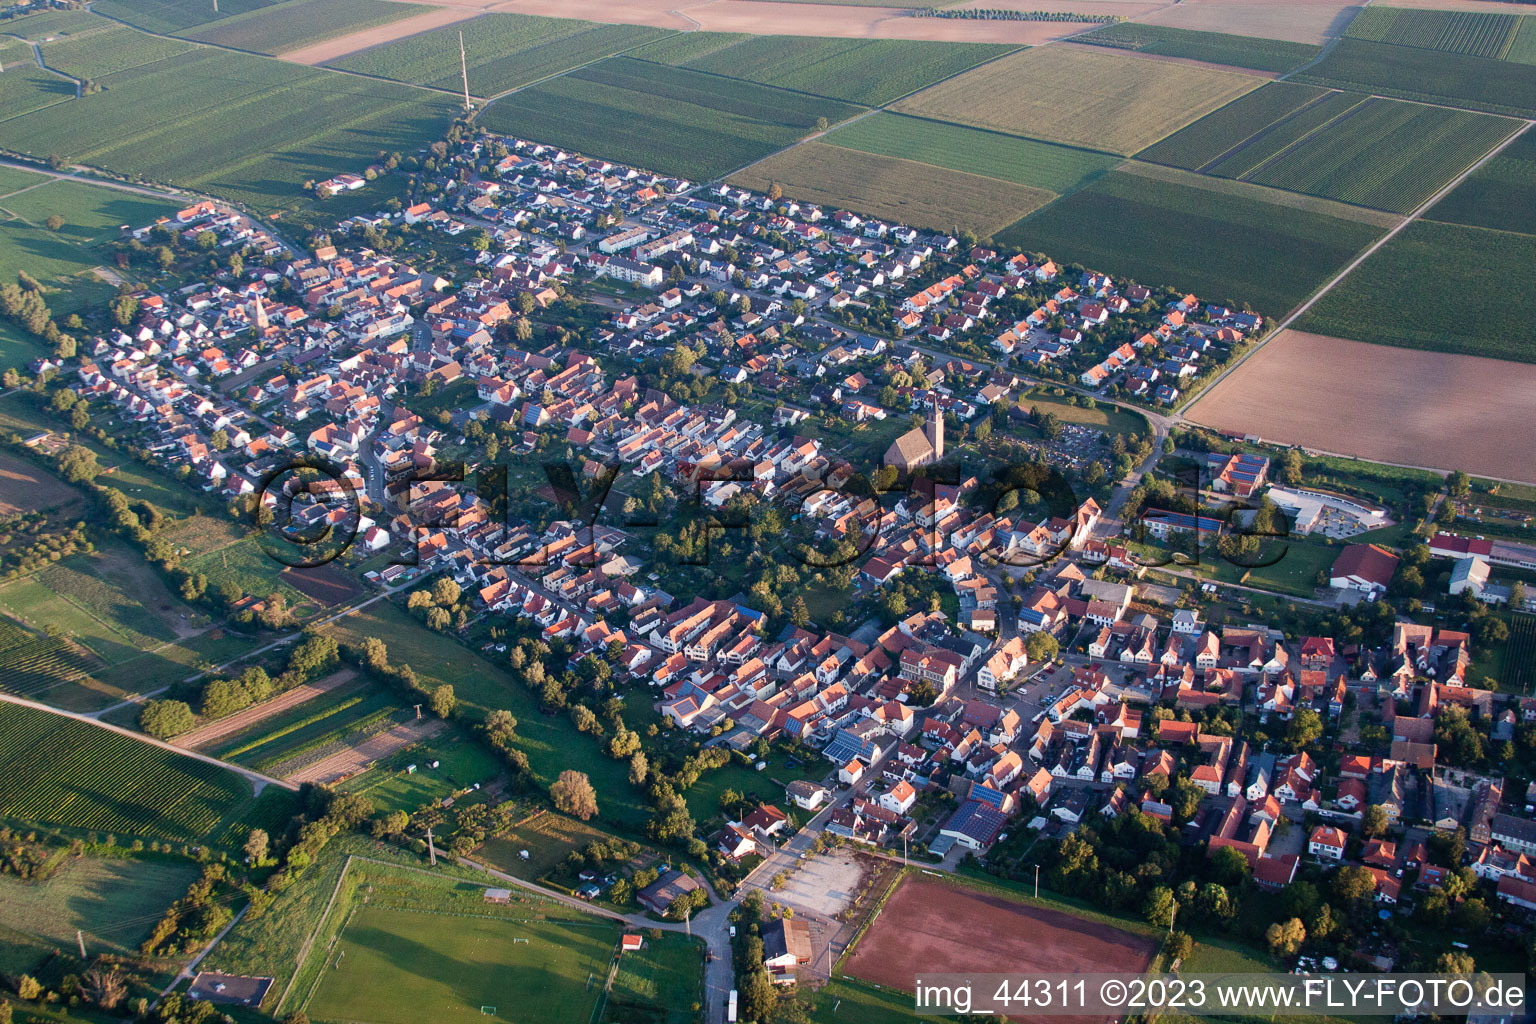 Essingen in the state Rhineland-Palatinate, Germany from above